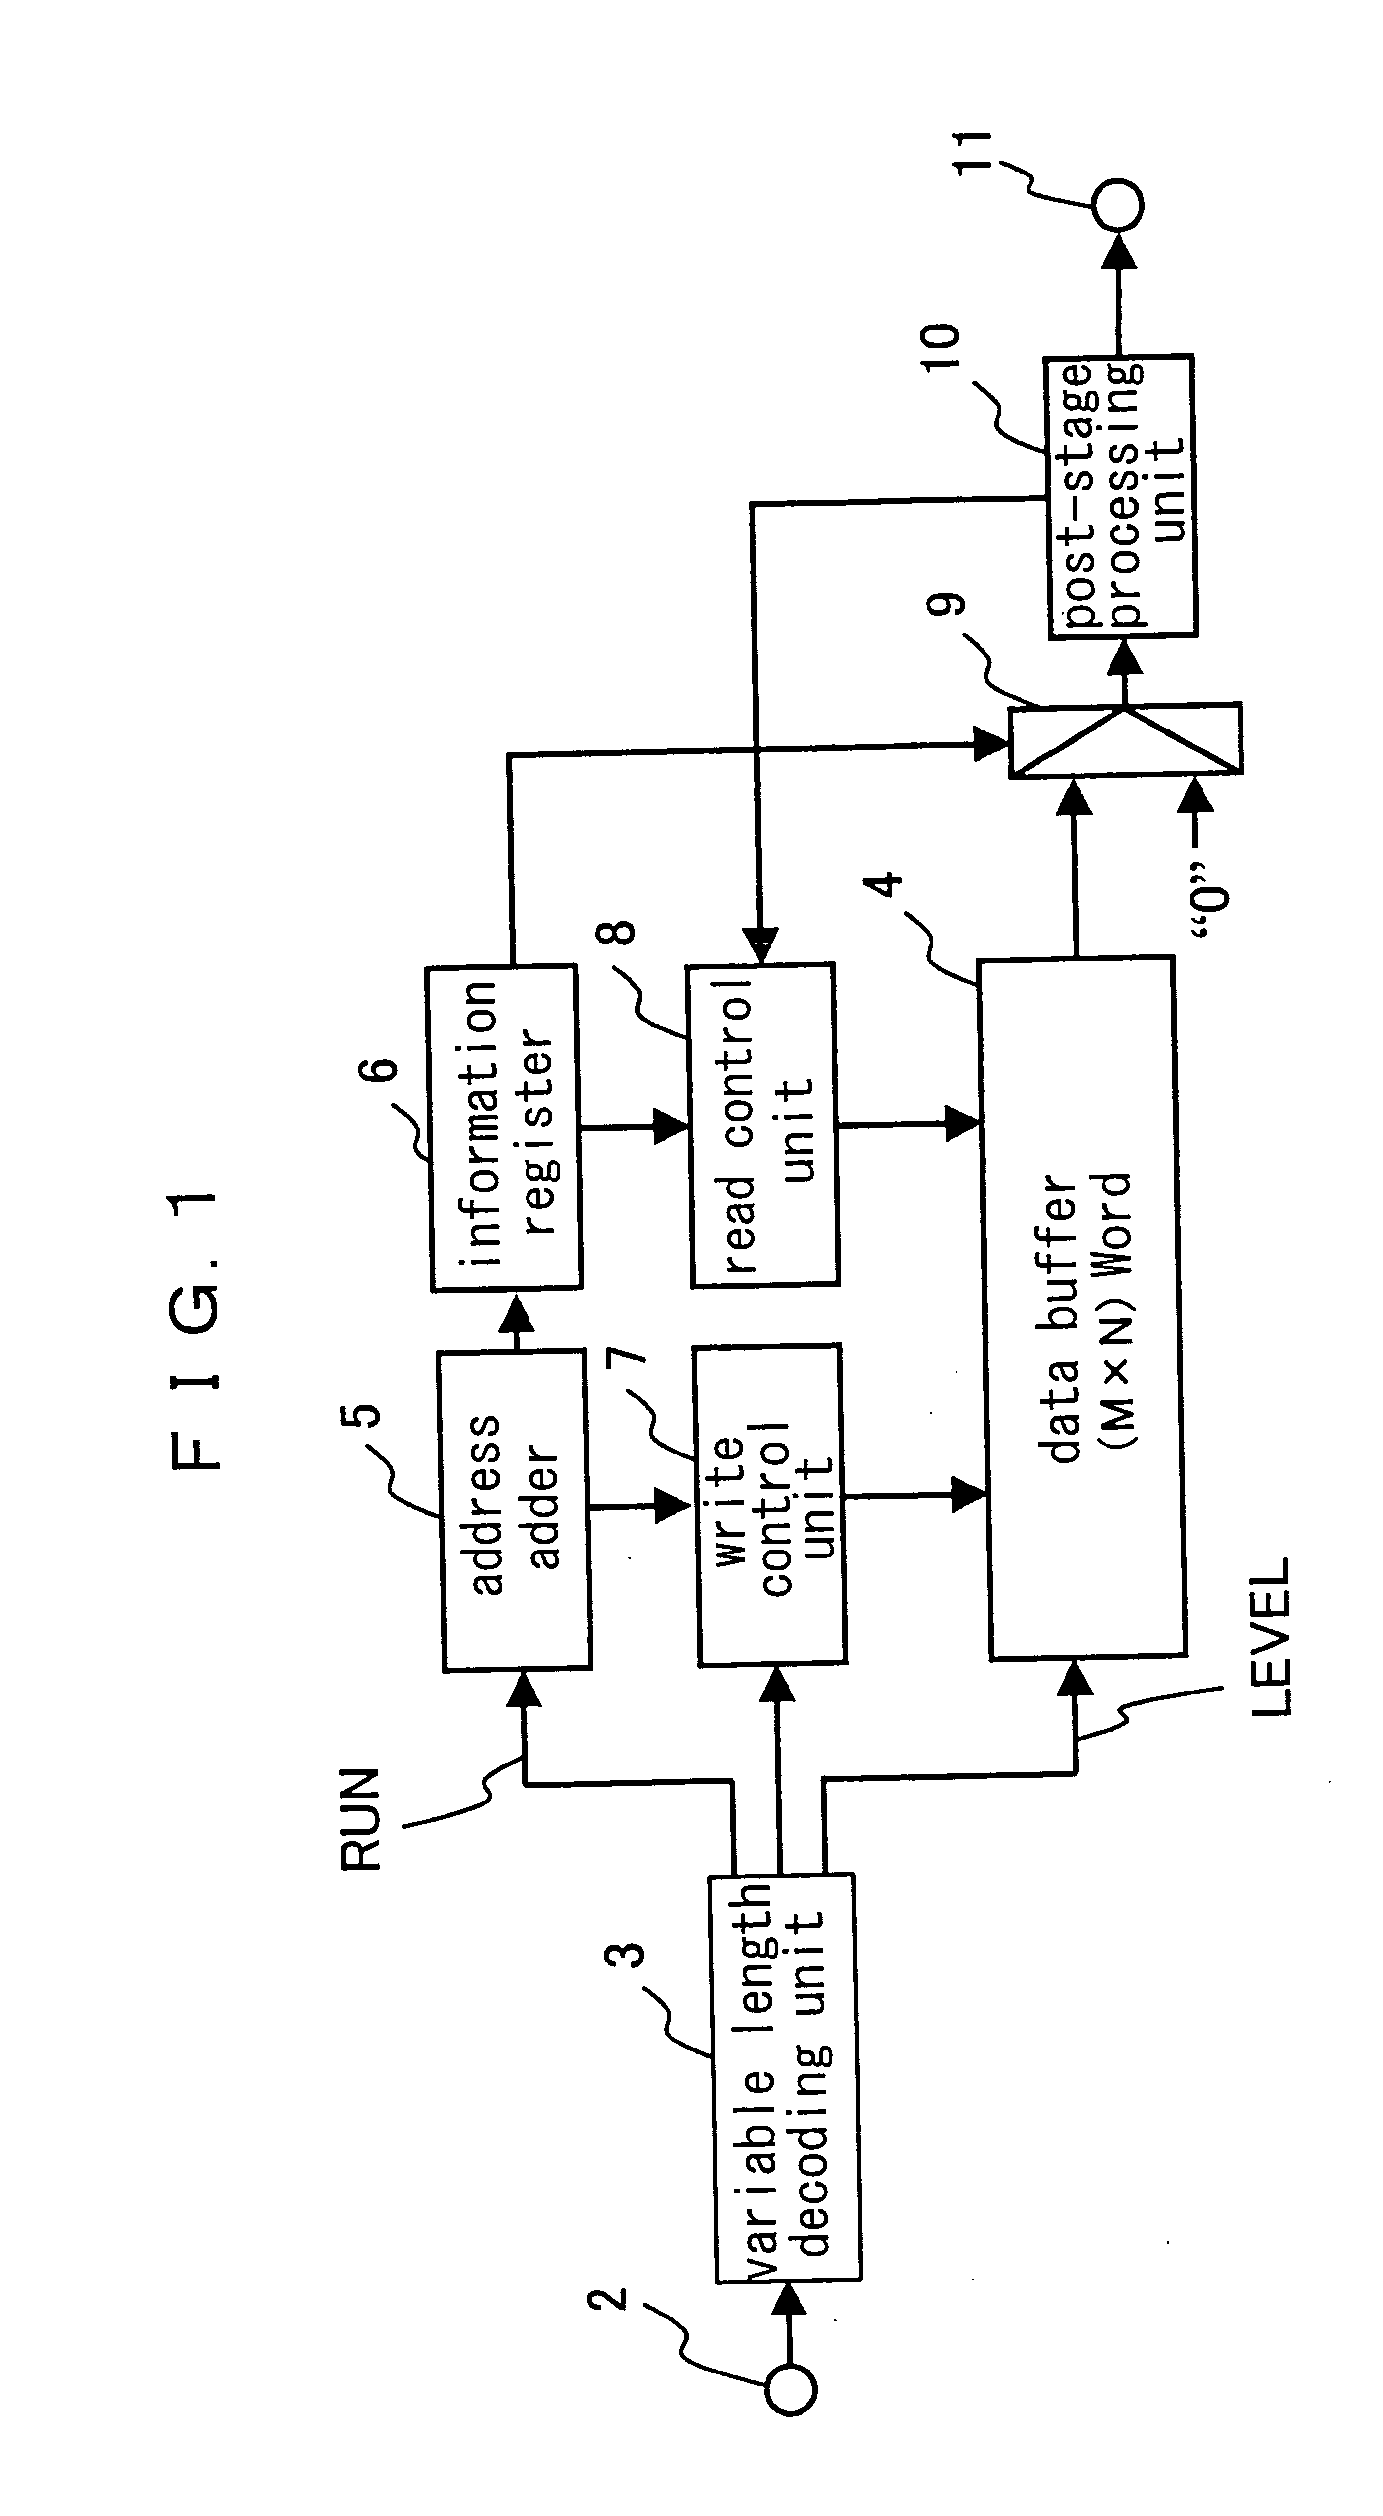 Variable length decoding device